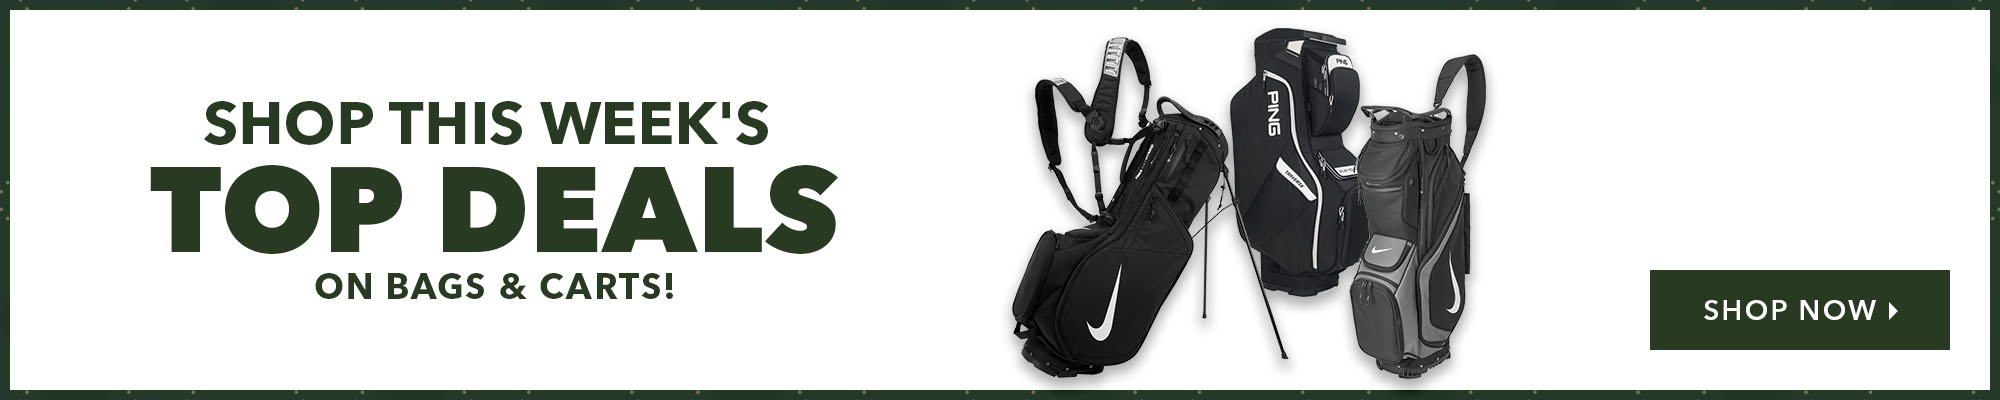 Father's Day Sale - Save Big On Clubs, Footwear, Tech & More!